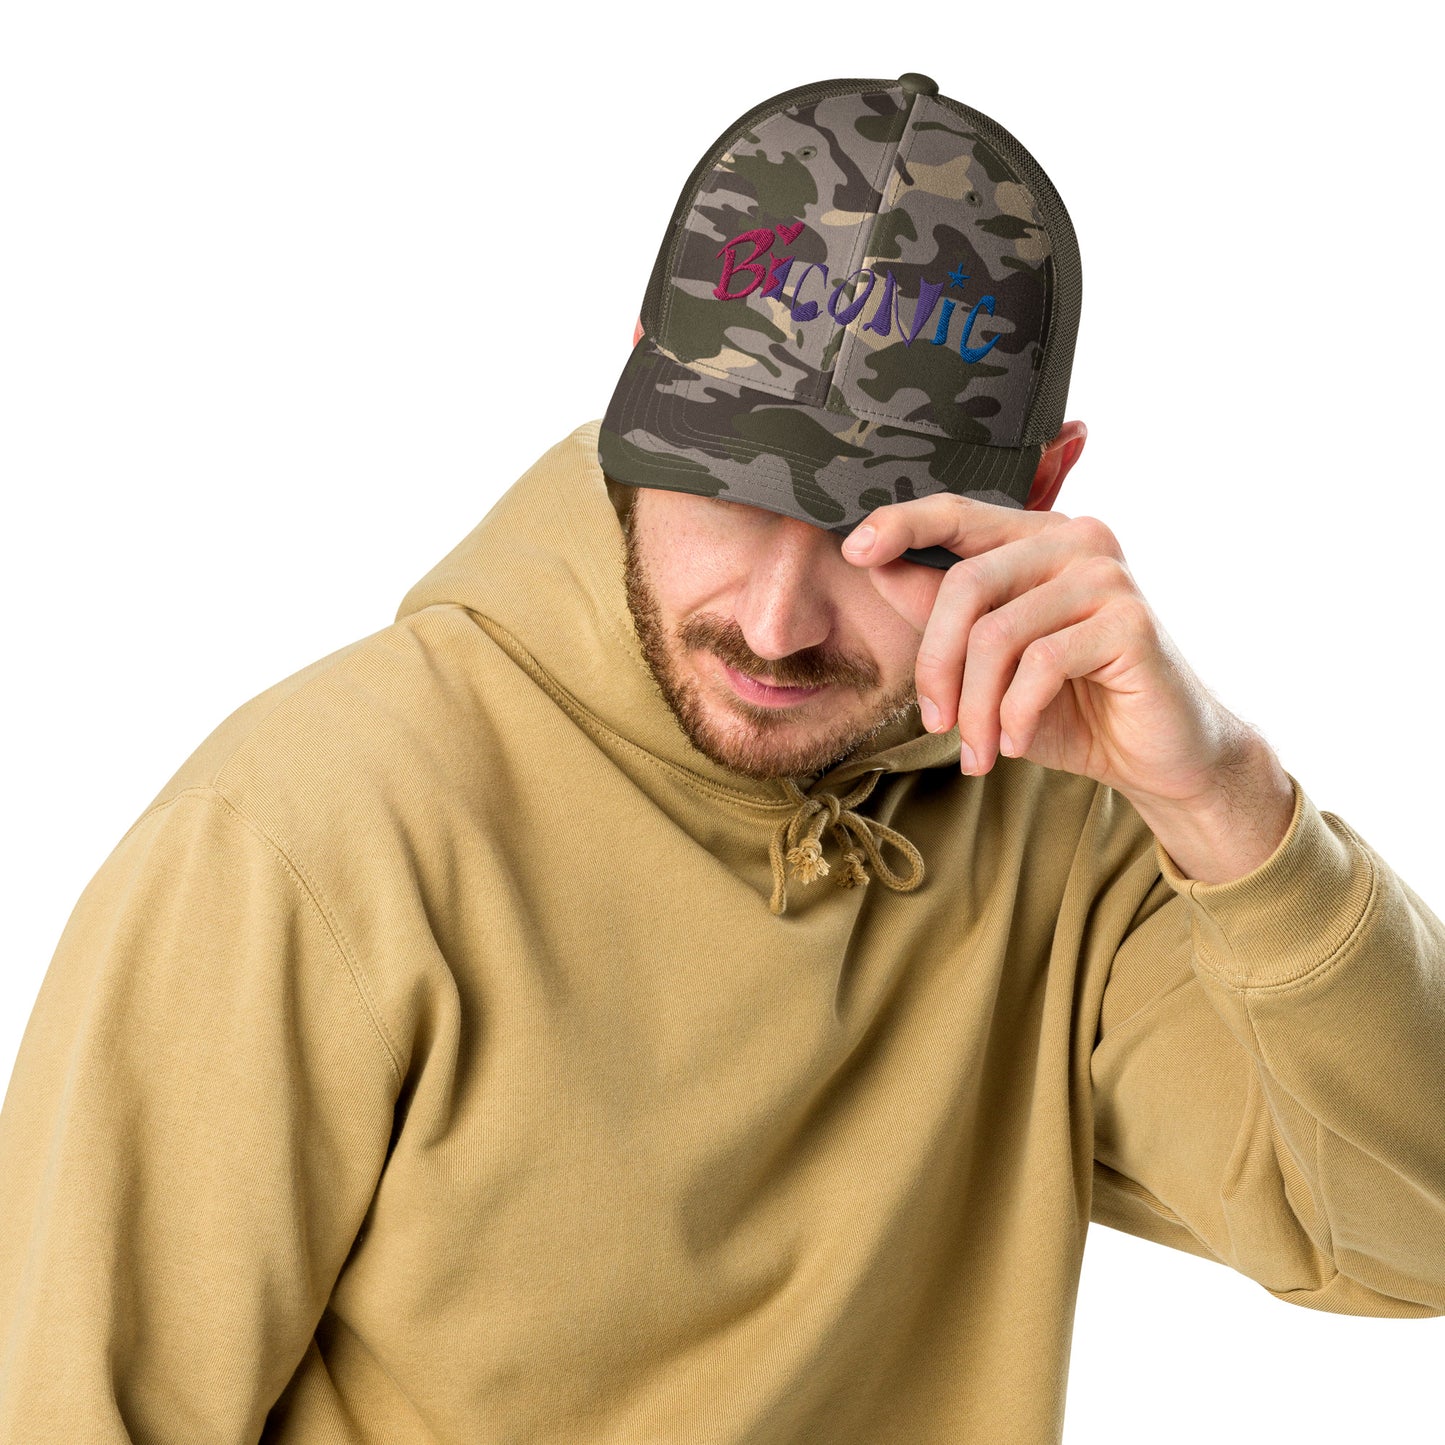 Camouflage trucker snapback hat - embroidered